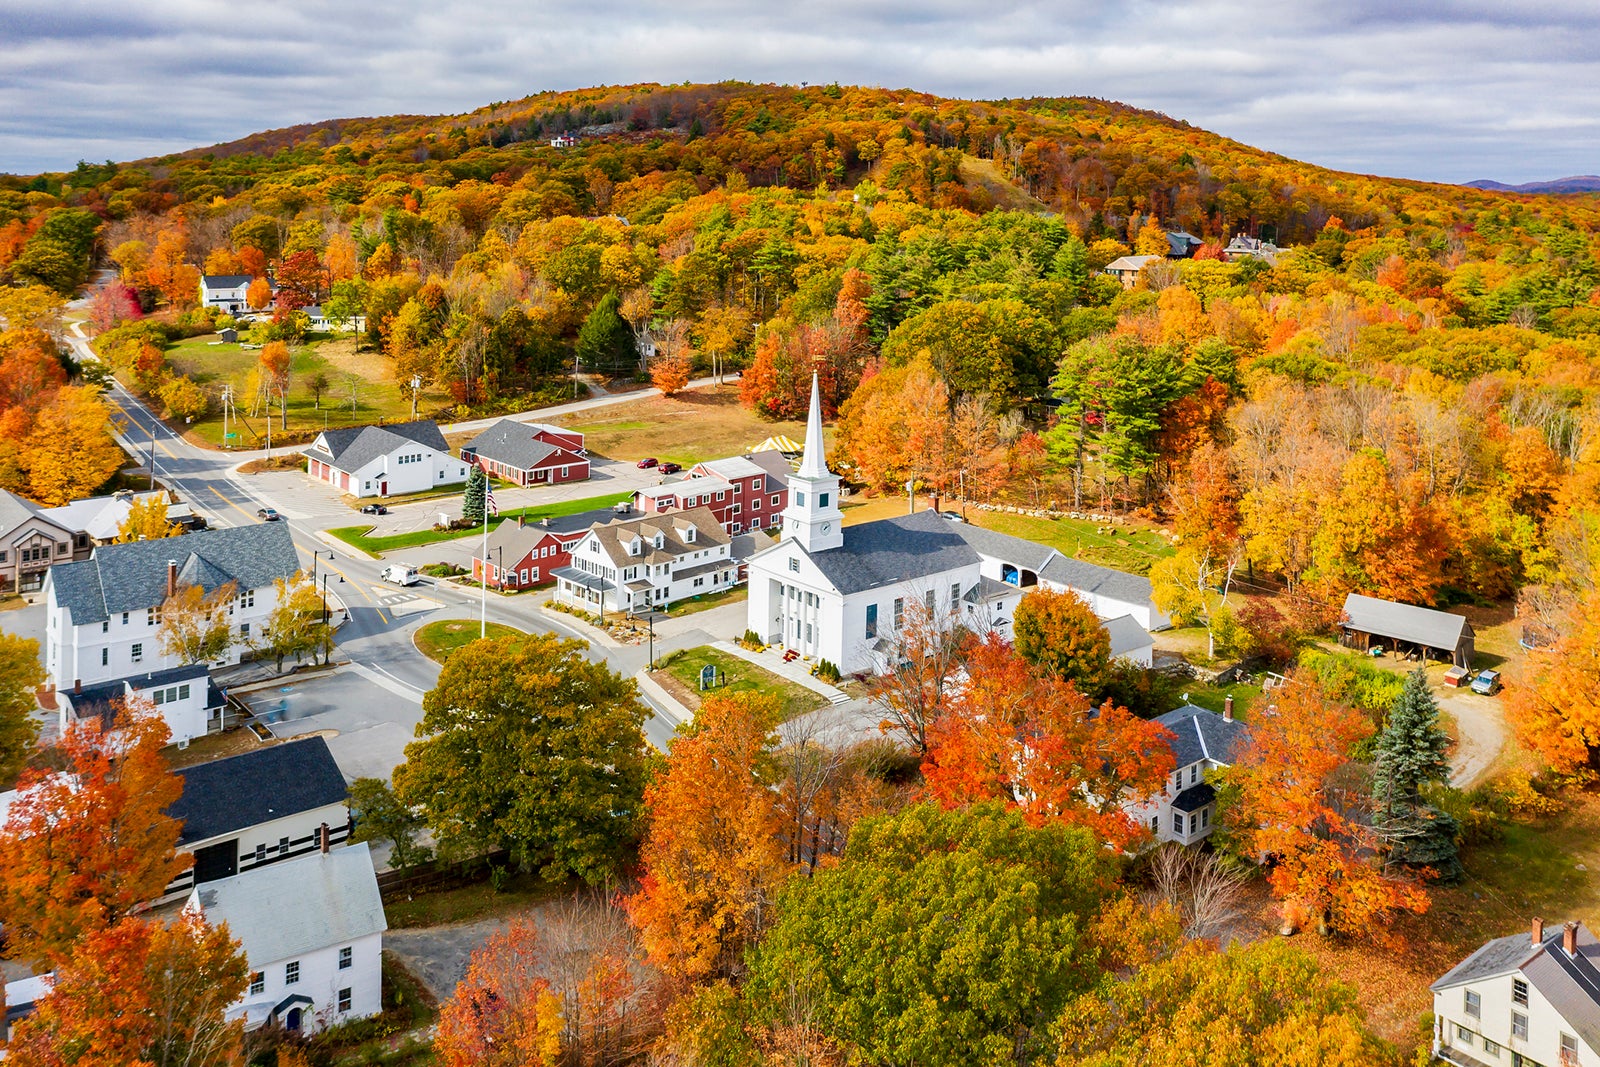 New England road trip: Where to see the most spectacular foliage